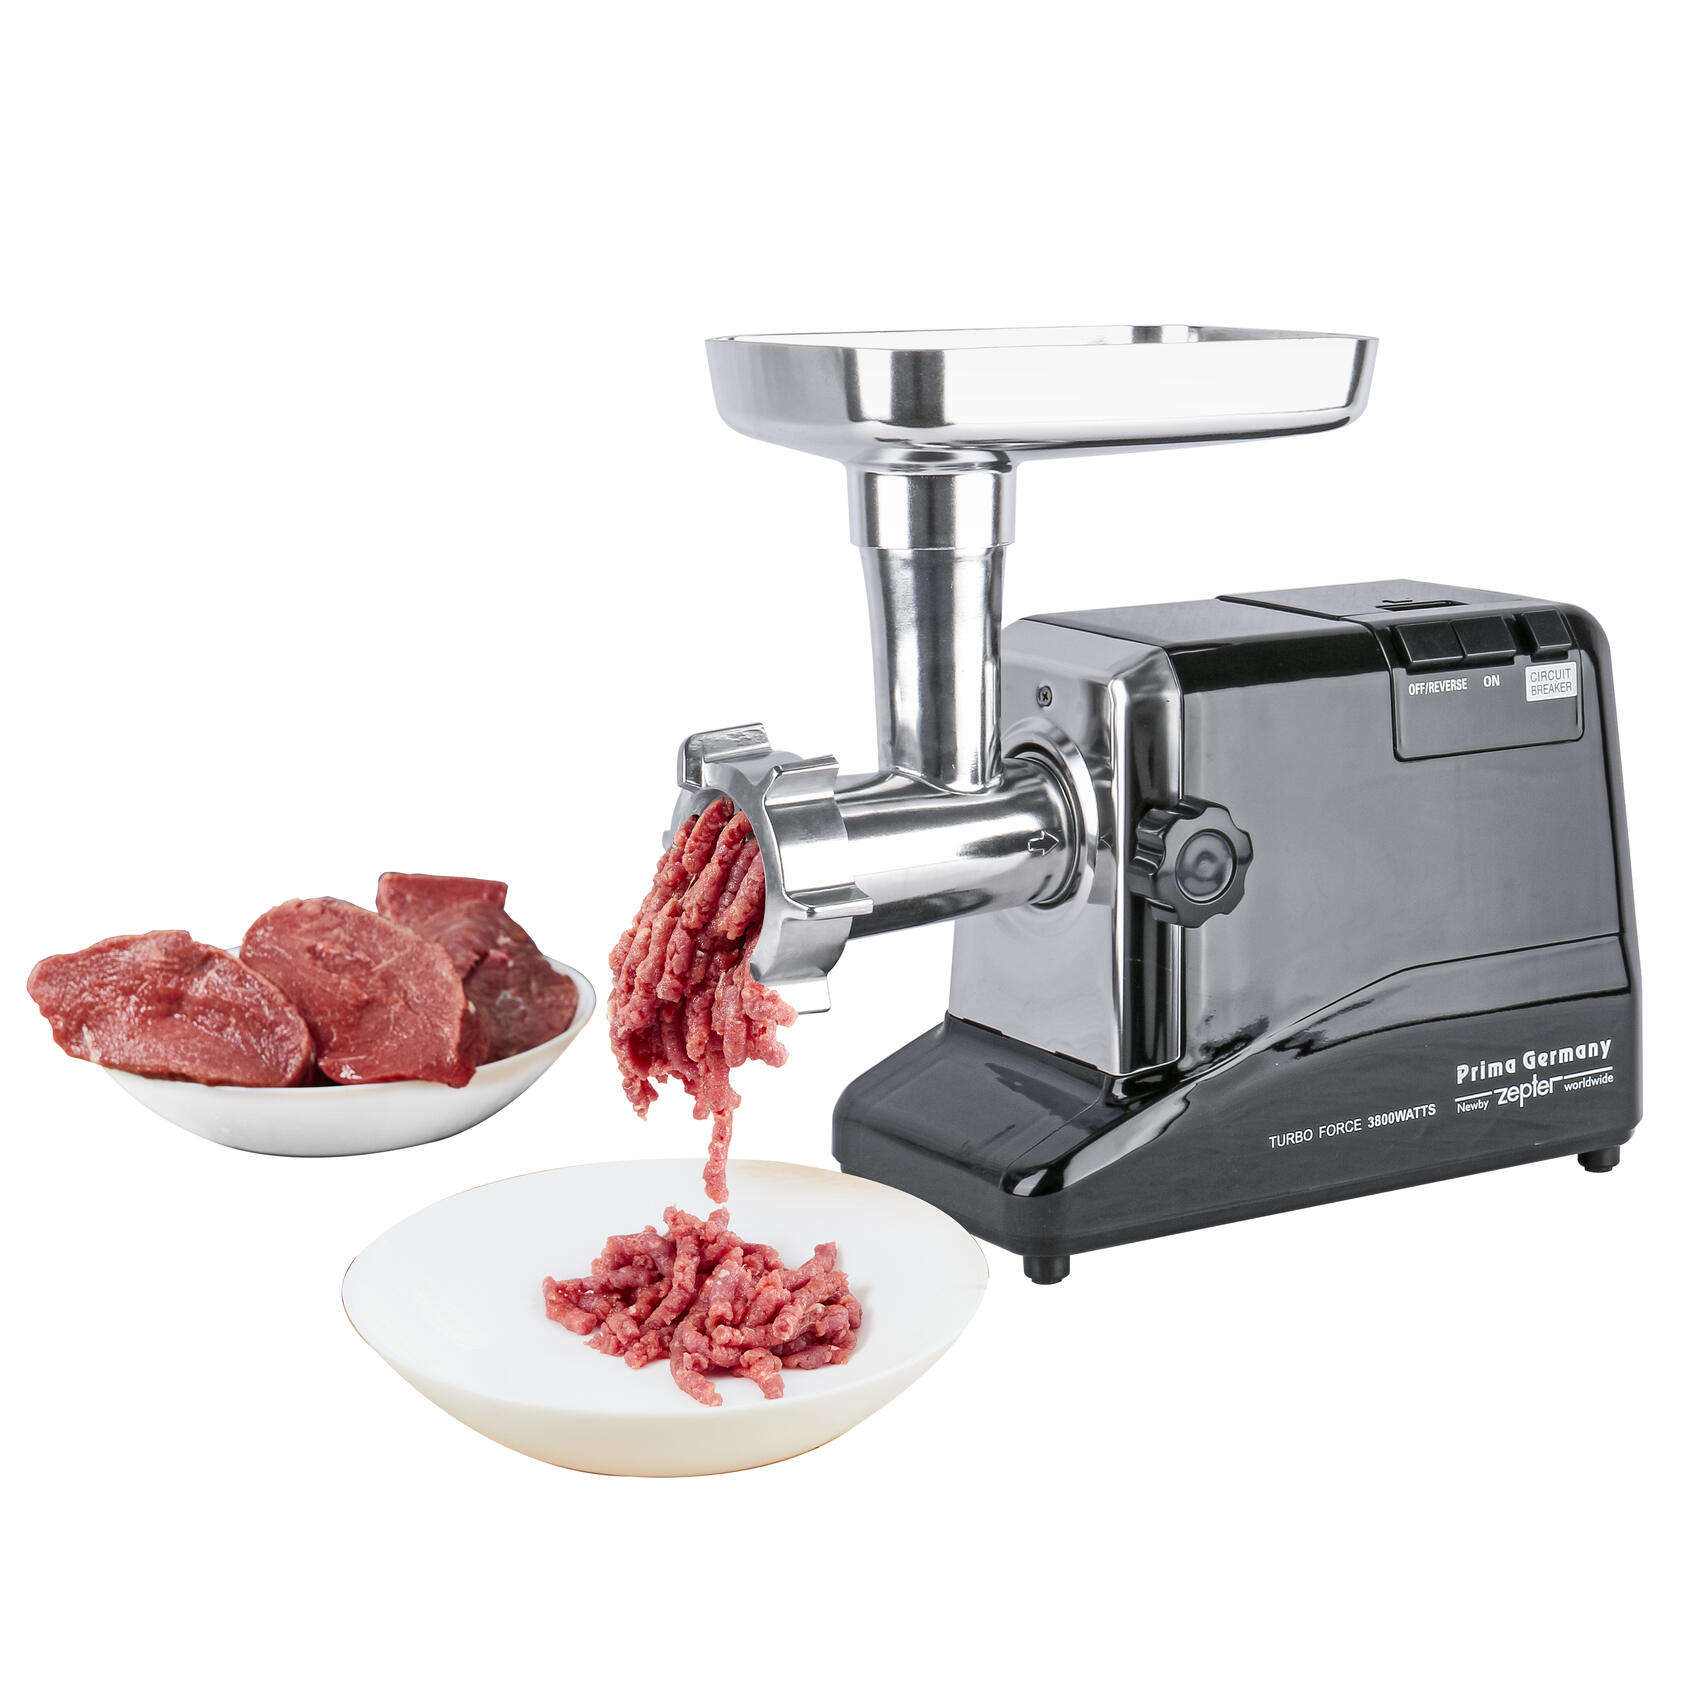 PRIMA MEAT GRINDER 3800W | HEAVY DUTY MOTOR | STAINLESS STEEL PANNEL | SAFTY CIRCUIT BREAKER TO PREVENT MOTOR BURN OUT | STAINLESSSTEEL CUTTING BLADE MG-3 